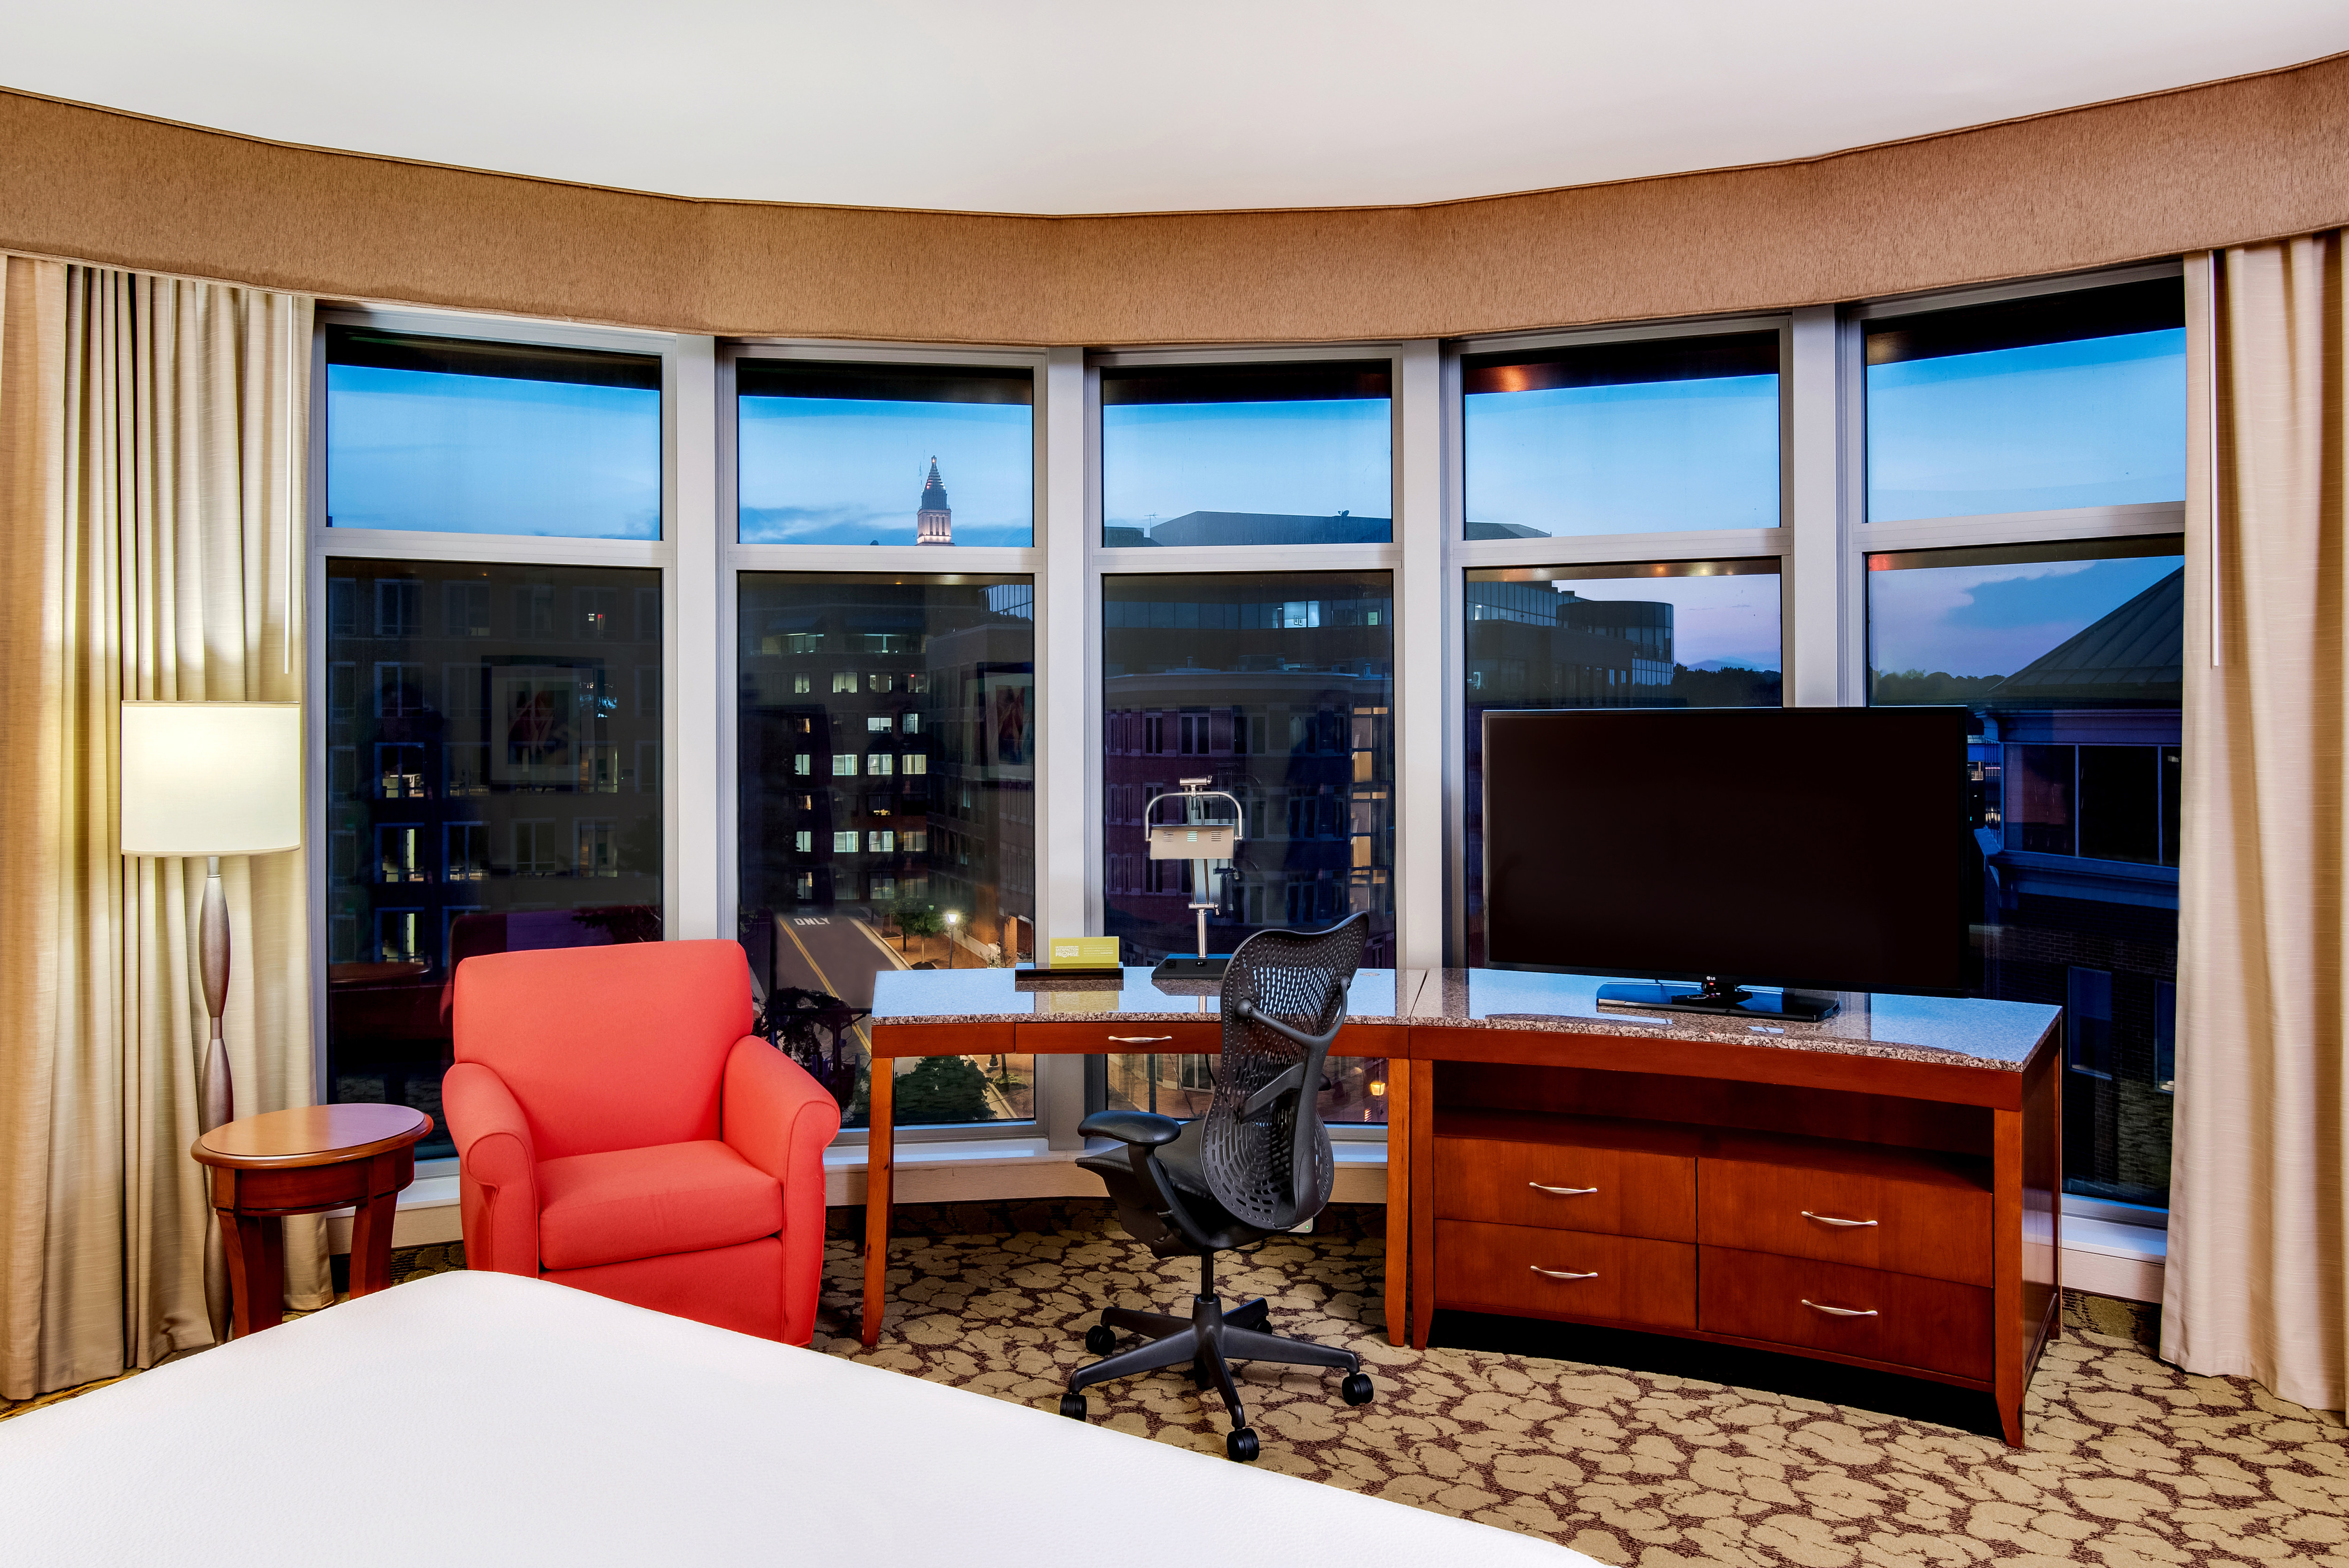 guest room, work desk, tv, window view of the city